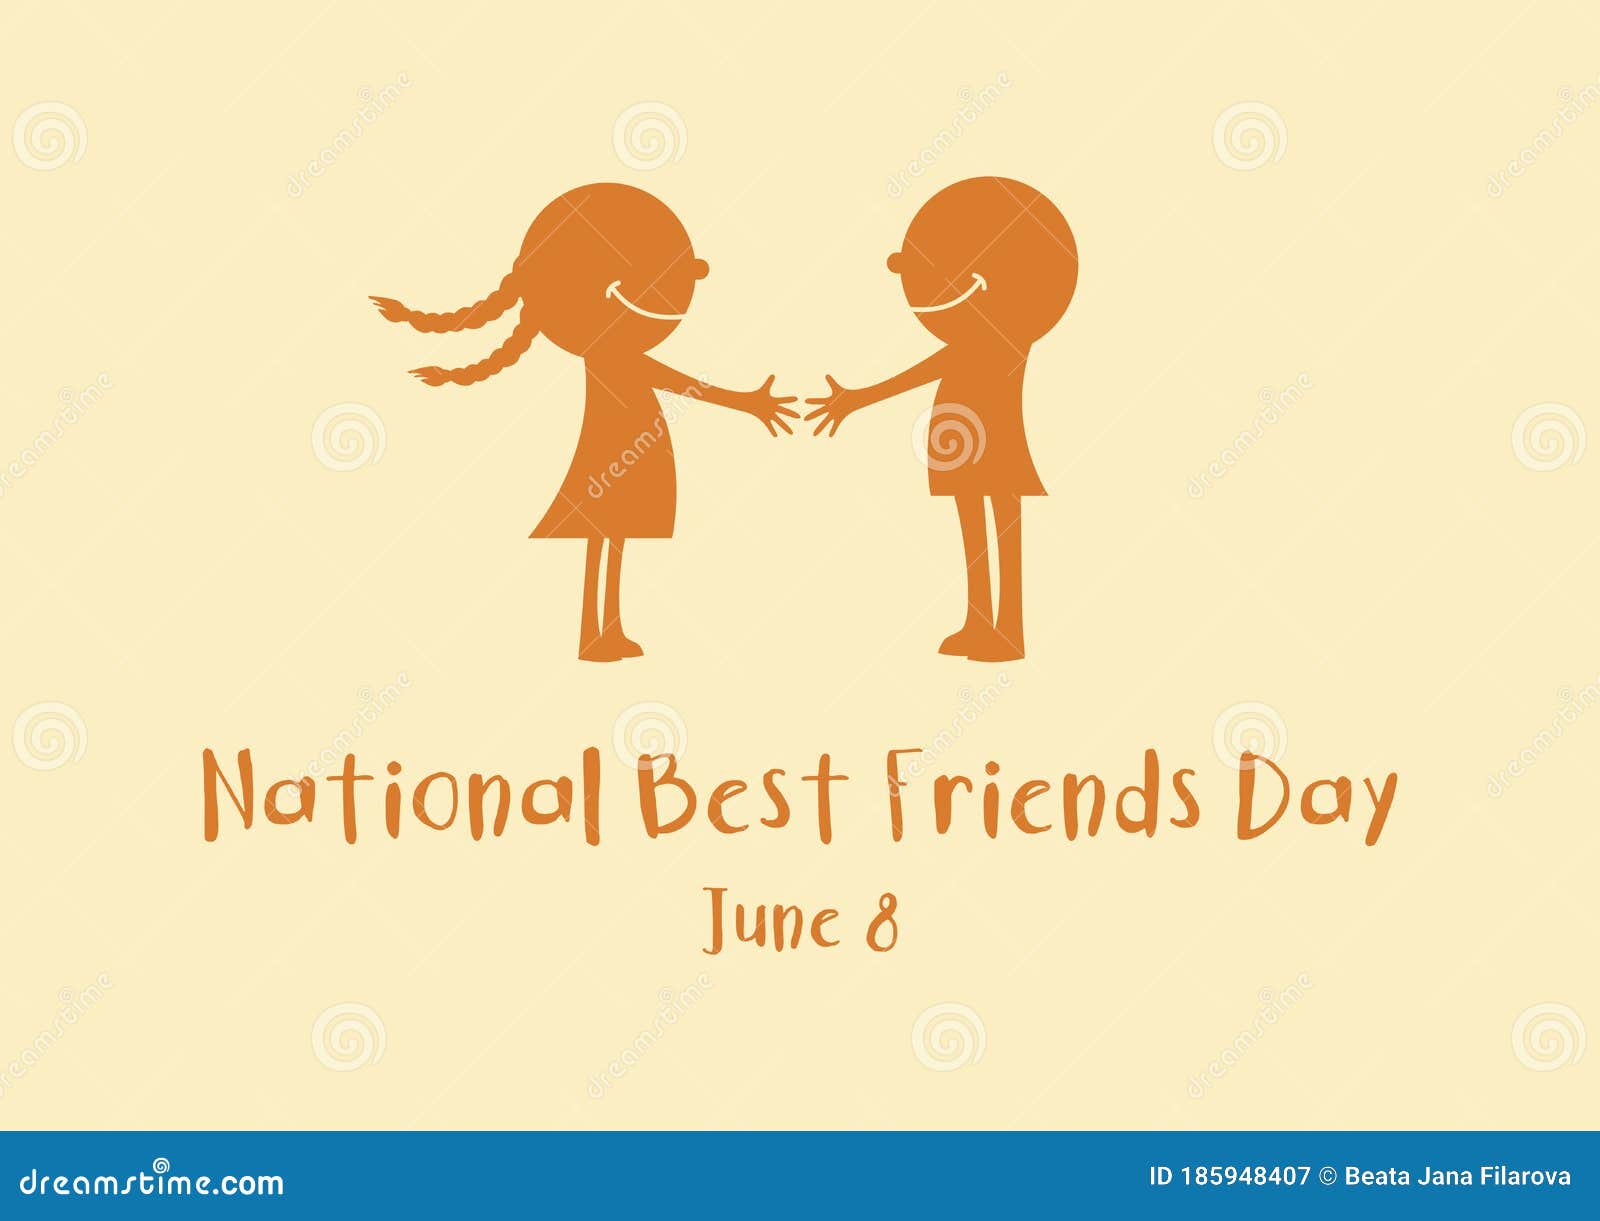 National Best Friends Day Vector Stock Vector Illustration of